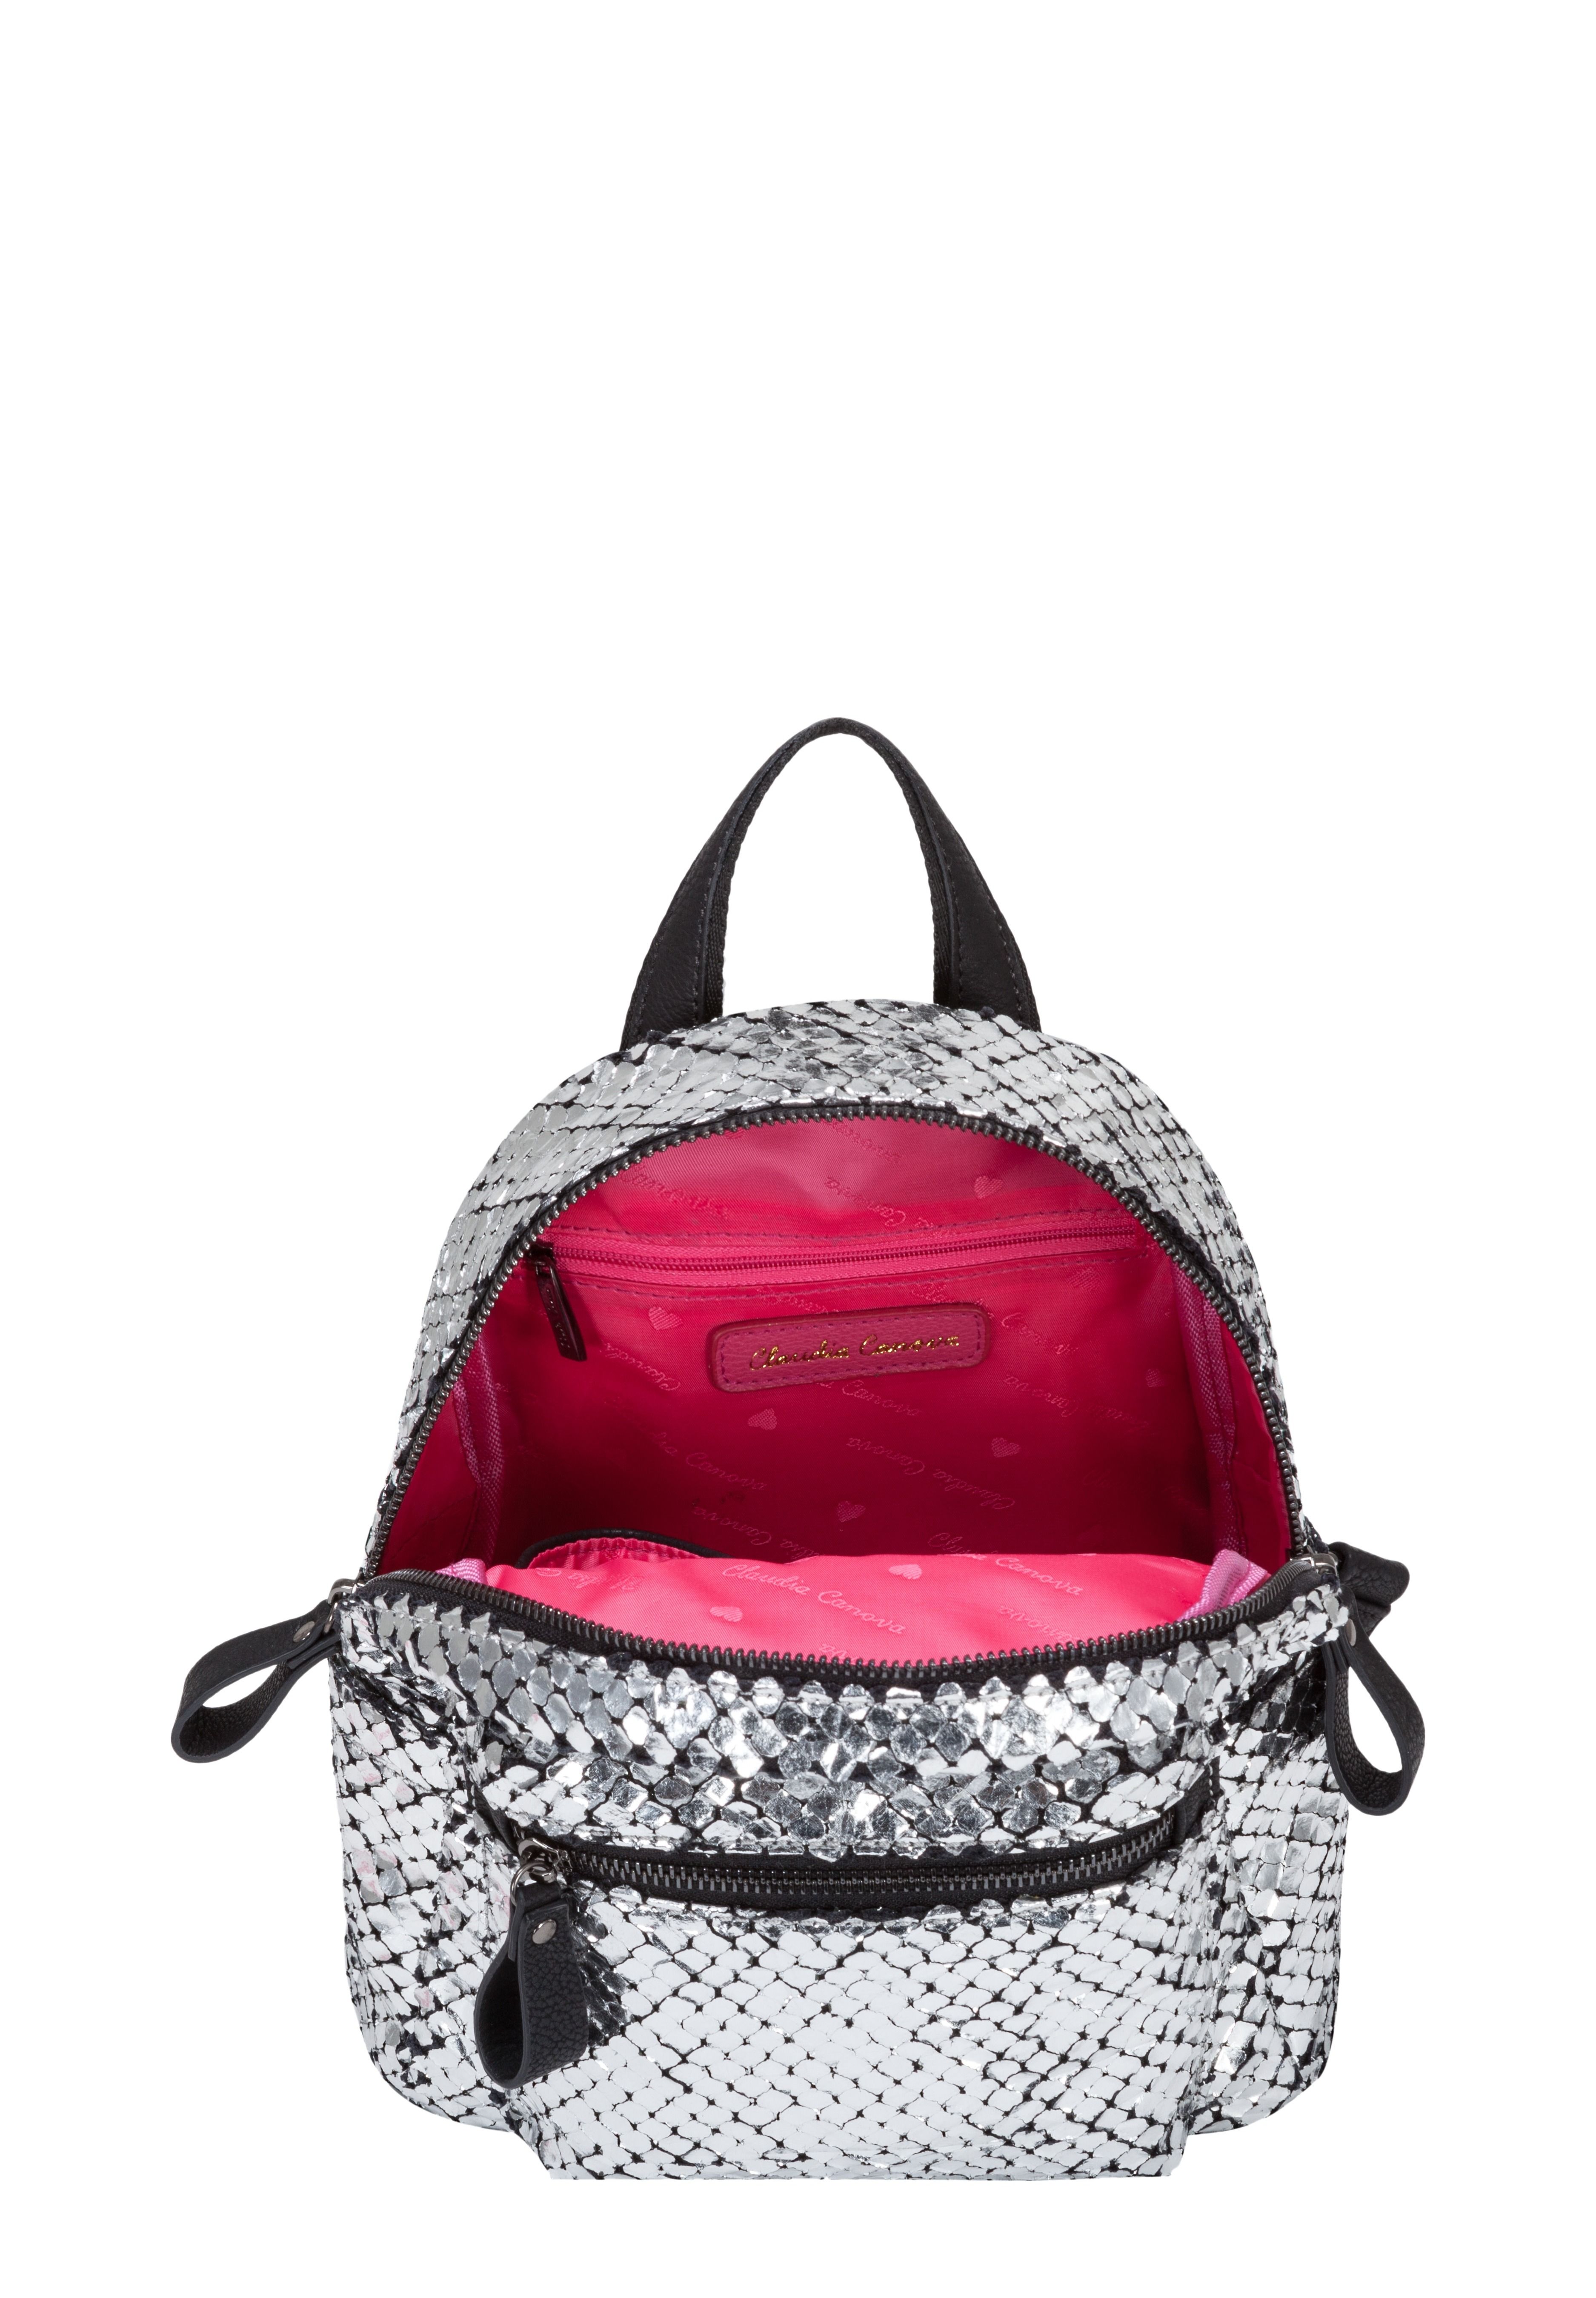 We are seriously crushin’ on these shimmery backpacks and know you will too! The rai backpack is ultra stylish and will add all sorts of sass to your outfit. Complete with gold metal detailing this backpack is the star of the show. Keep all your belongings organised in the front zip pocket and inner slip / zip pockets. Features: , pu metallic textured exterior, claudia canova gold plate logo, adjustable backpack straps, zip round opening, front zip pocket, gold metal hardware, claudia canova branded lining, inner slip and zip pockets